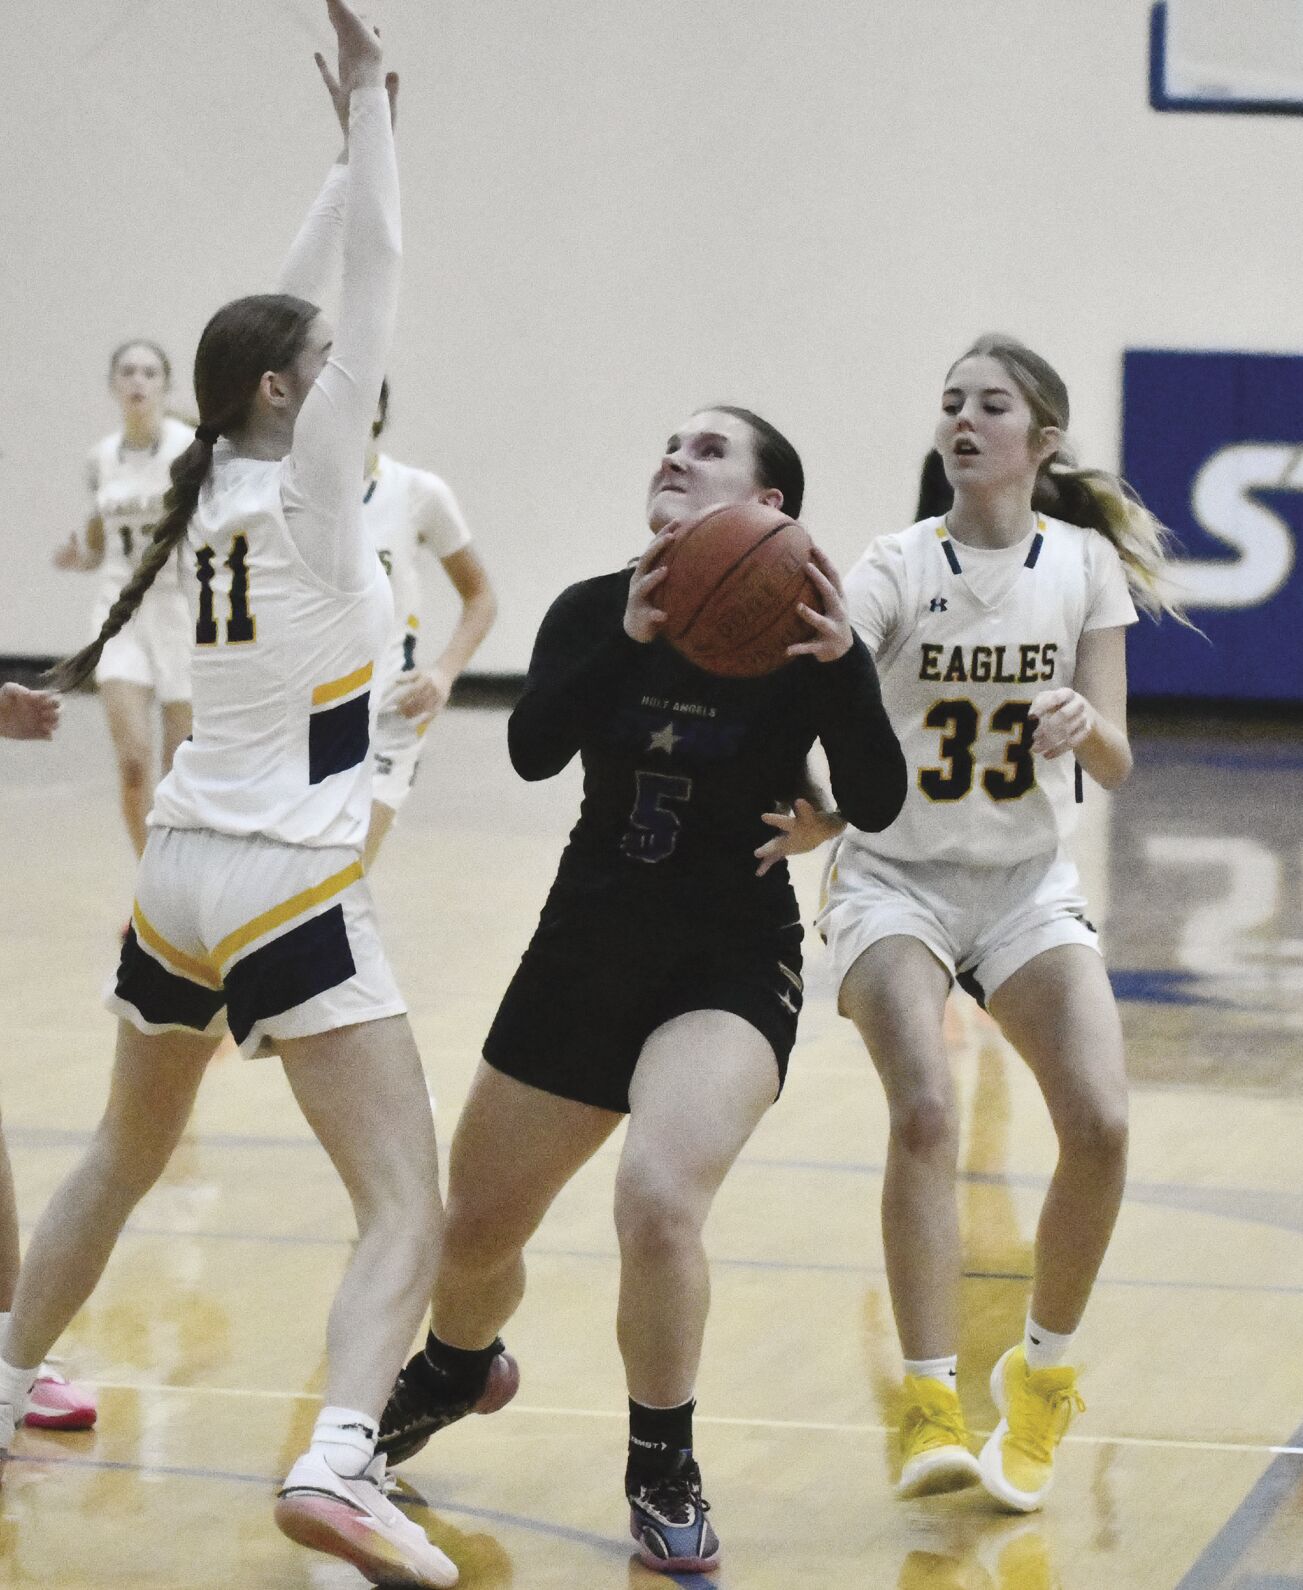 Despite 24 points from Lind, Stars fall to Totino-Grace 75-63